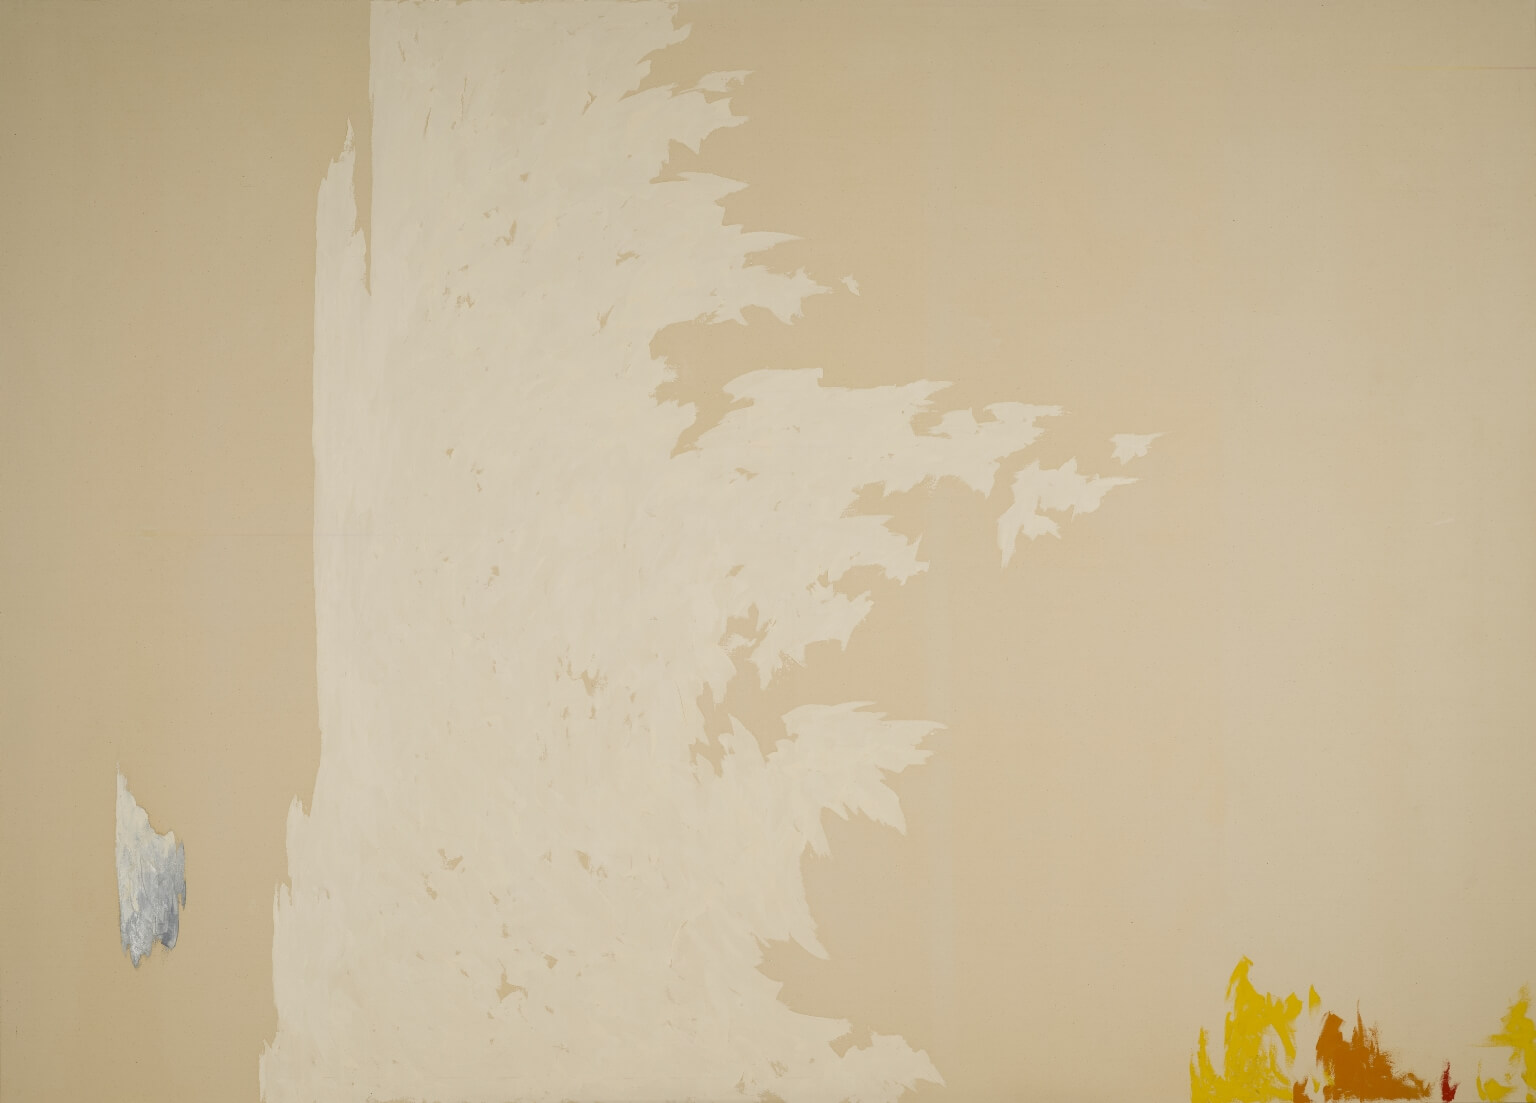 Abstract painting with bare canvas, large splotch of tan and white paint in the middle that looks like it is blowing, with small patches of blue, yellow, and red paint